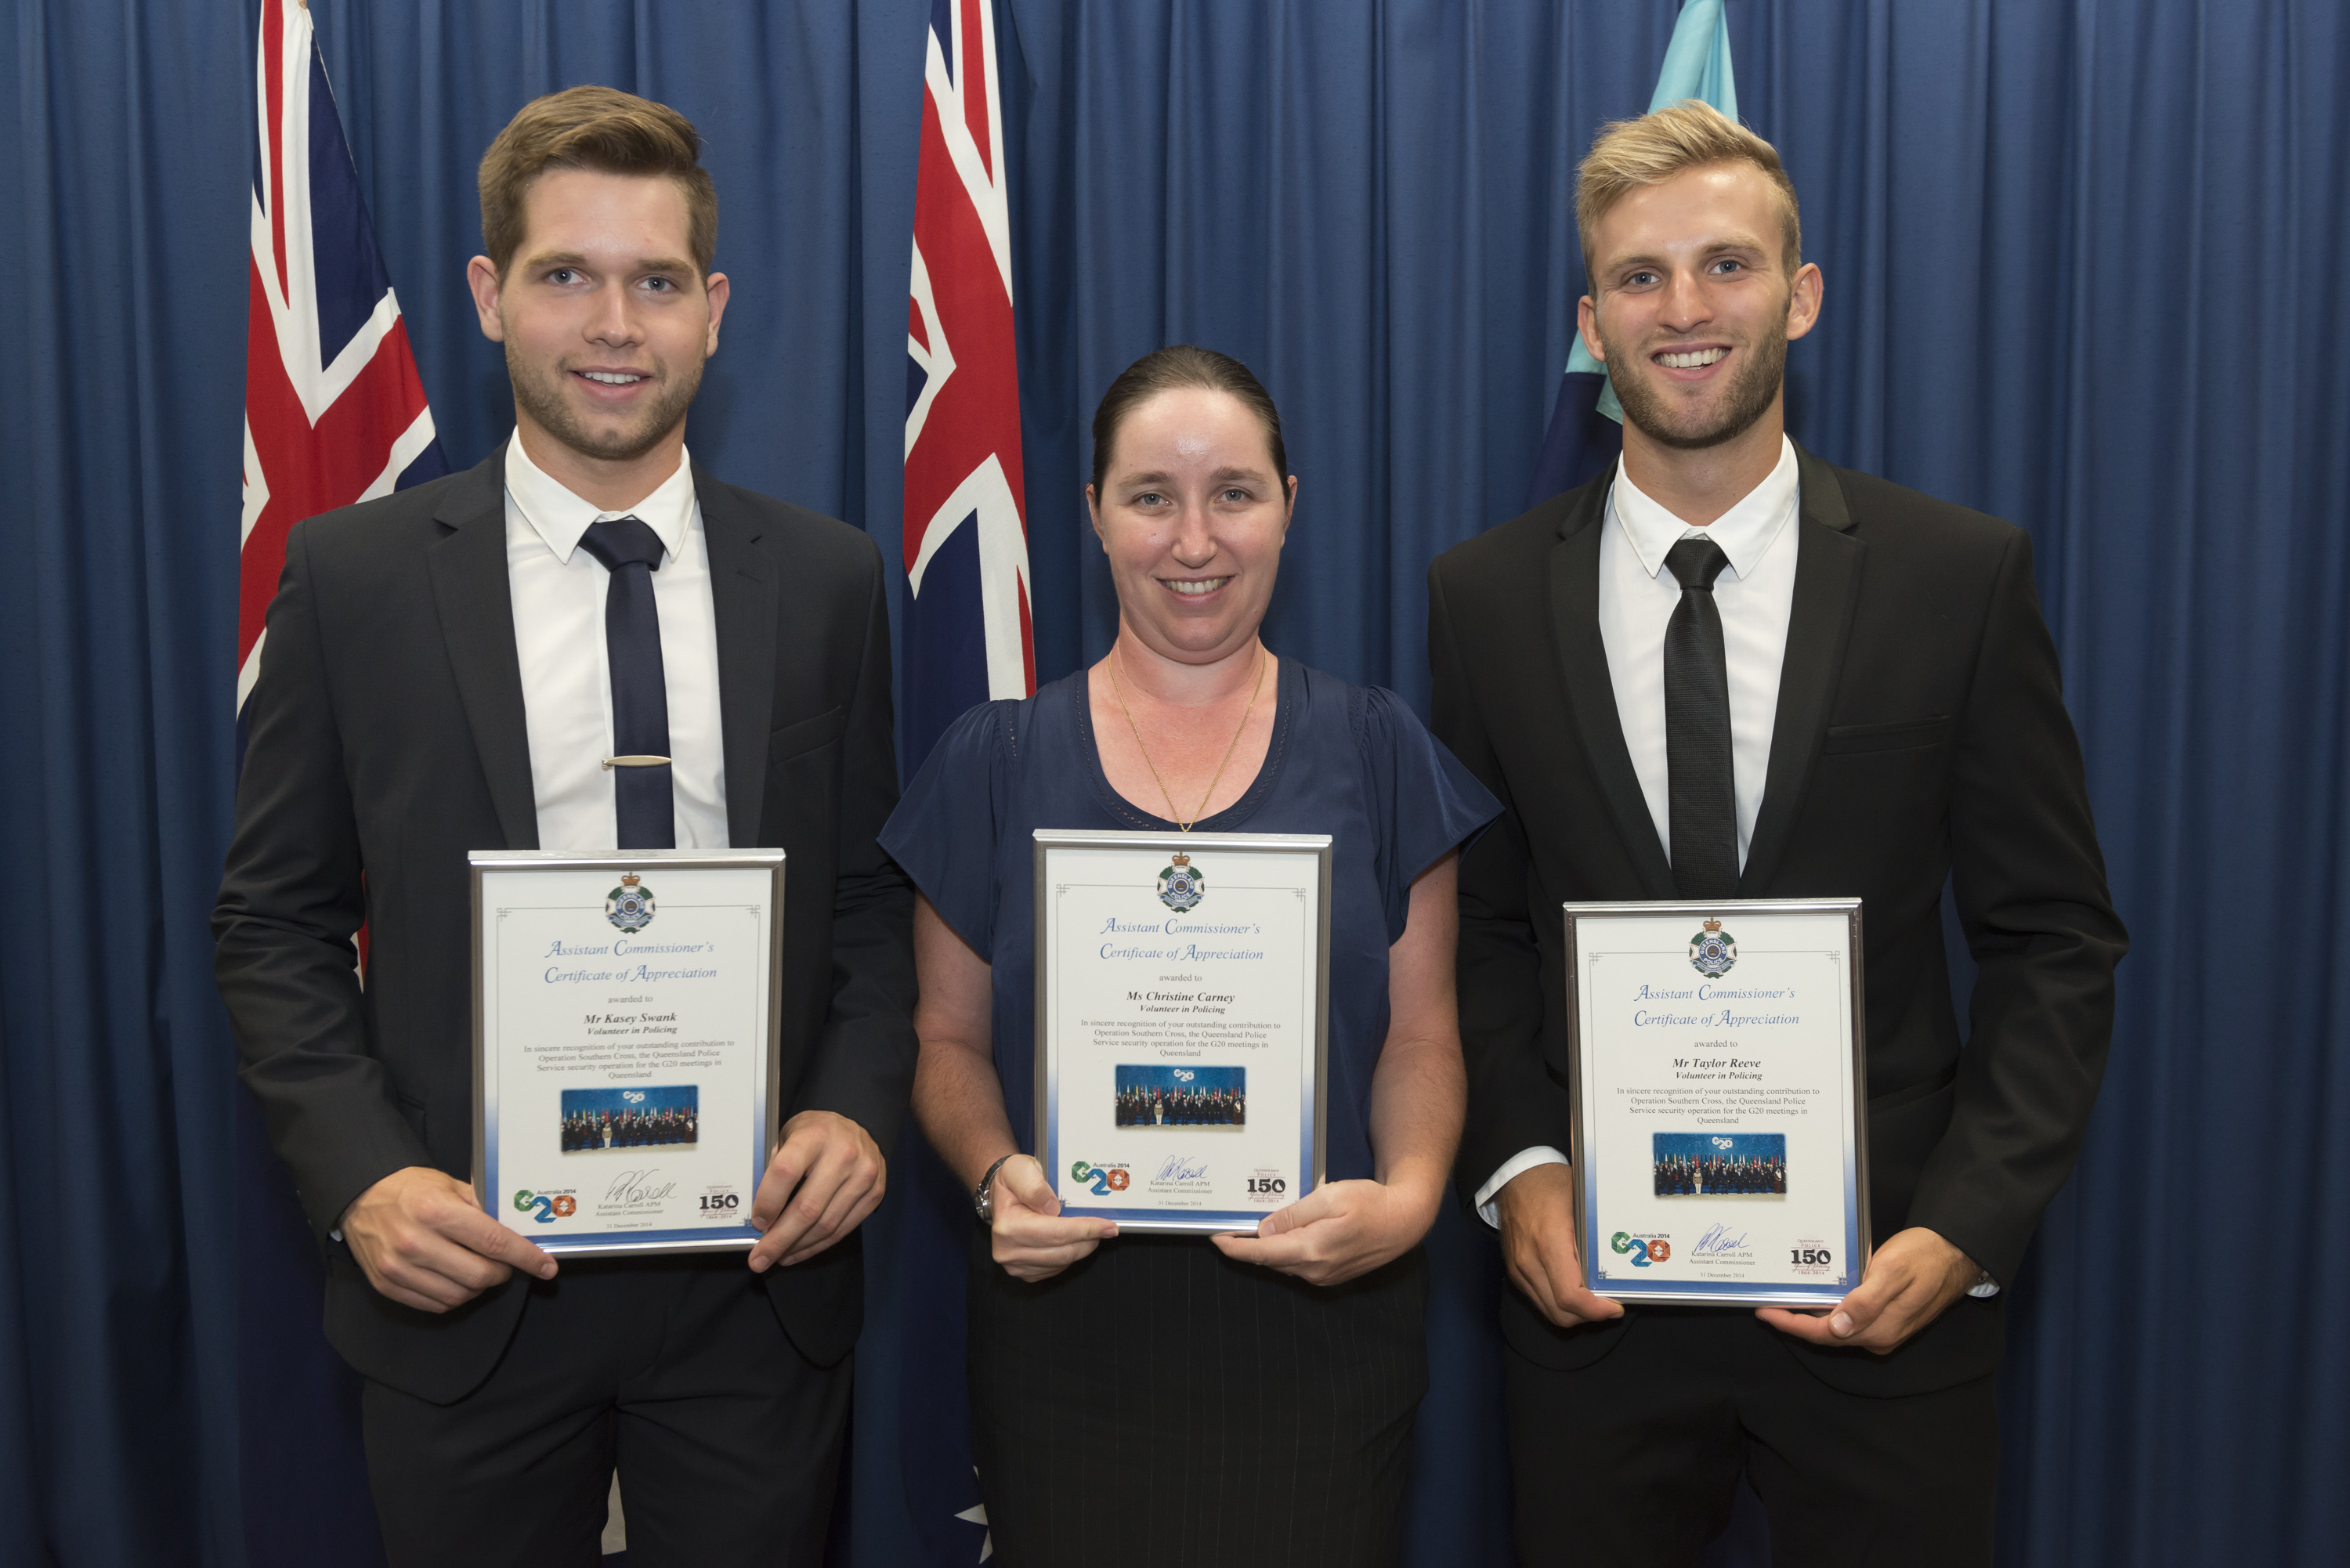 Griffith criminology students Christine Carney, Kasey Swank and Taylor Reeve receive their police awards following their work in the lead up to the G20